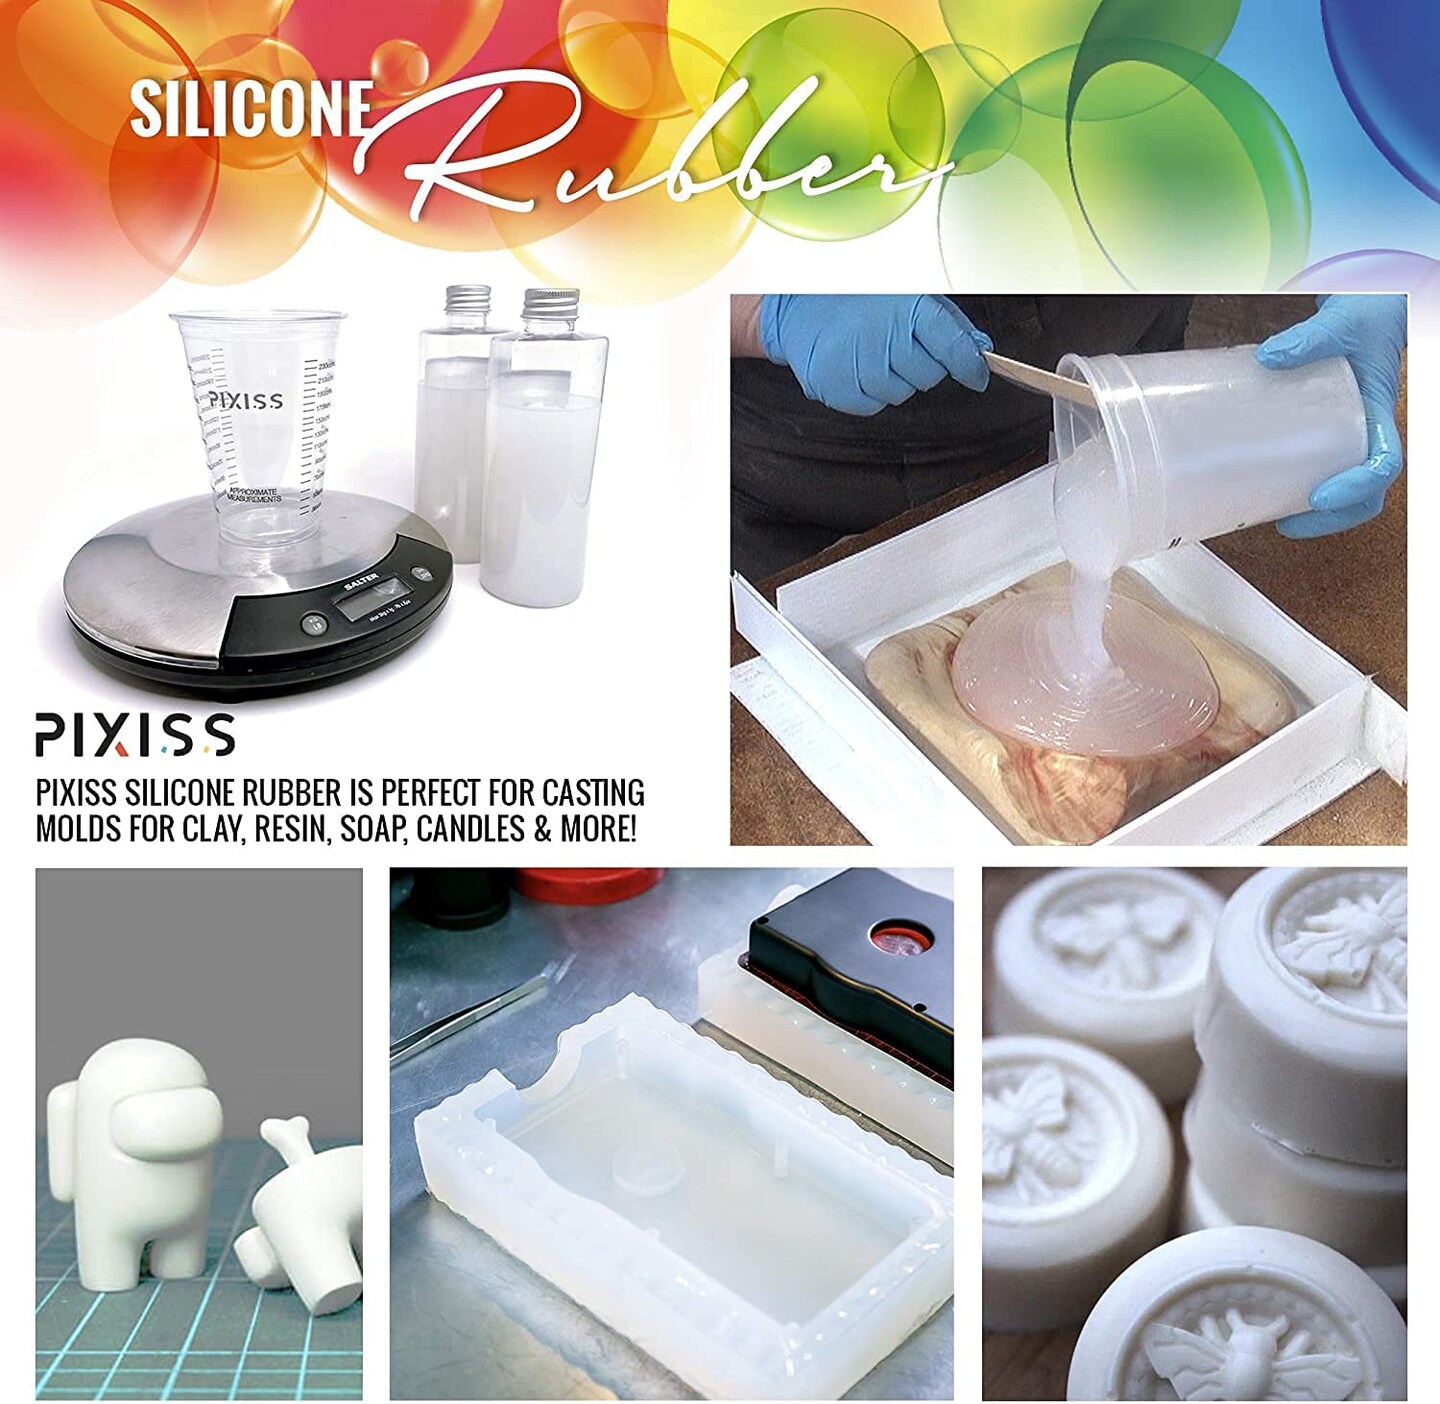 Food Grade Translucent Silicone Mold Maker, Translucent Liquid Mold Maker, Clear Mold Making, Make Your Own Silicone Mold for UV Resin